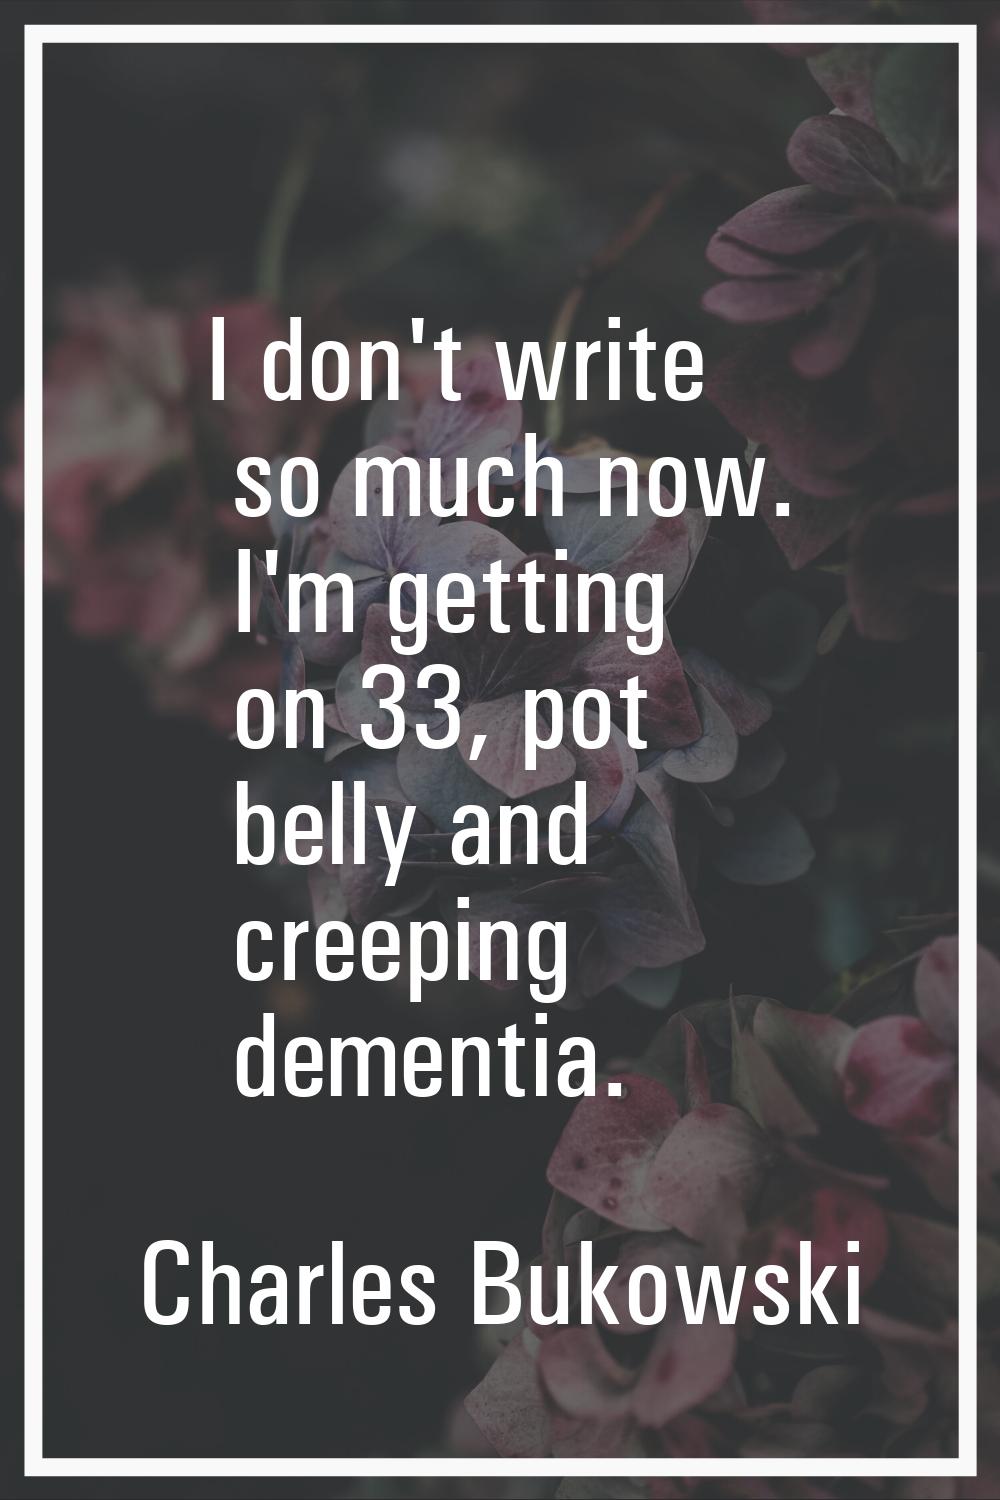 I don't write so much now. I'm getting on 33, pot belly and creeping dementia.